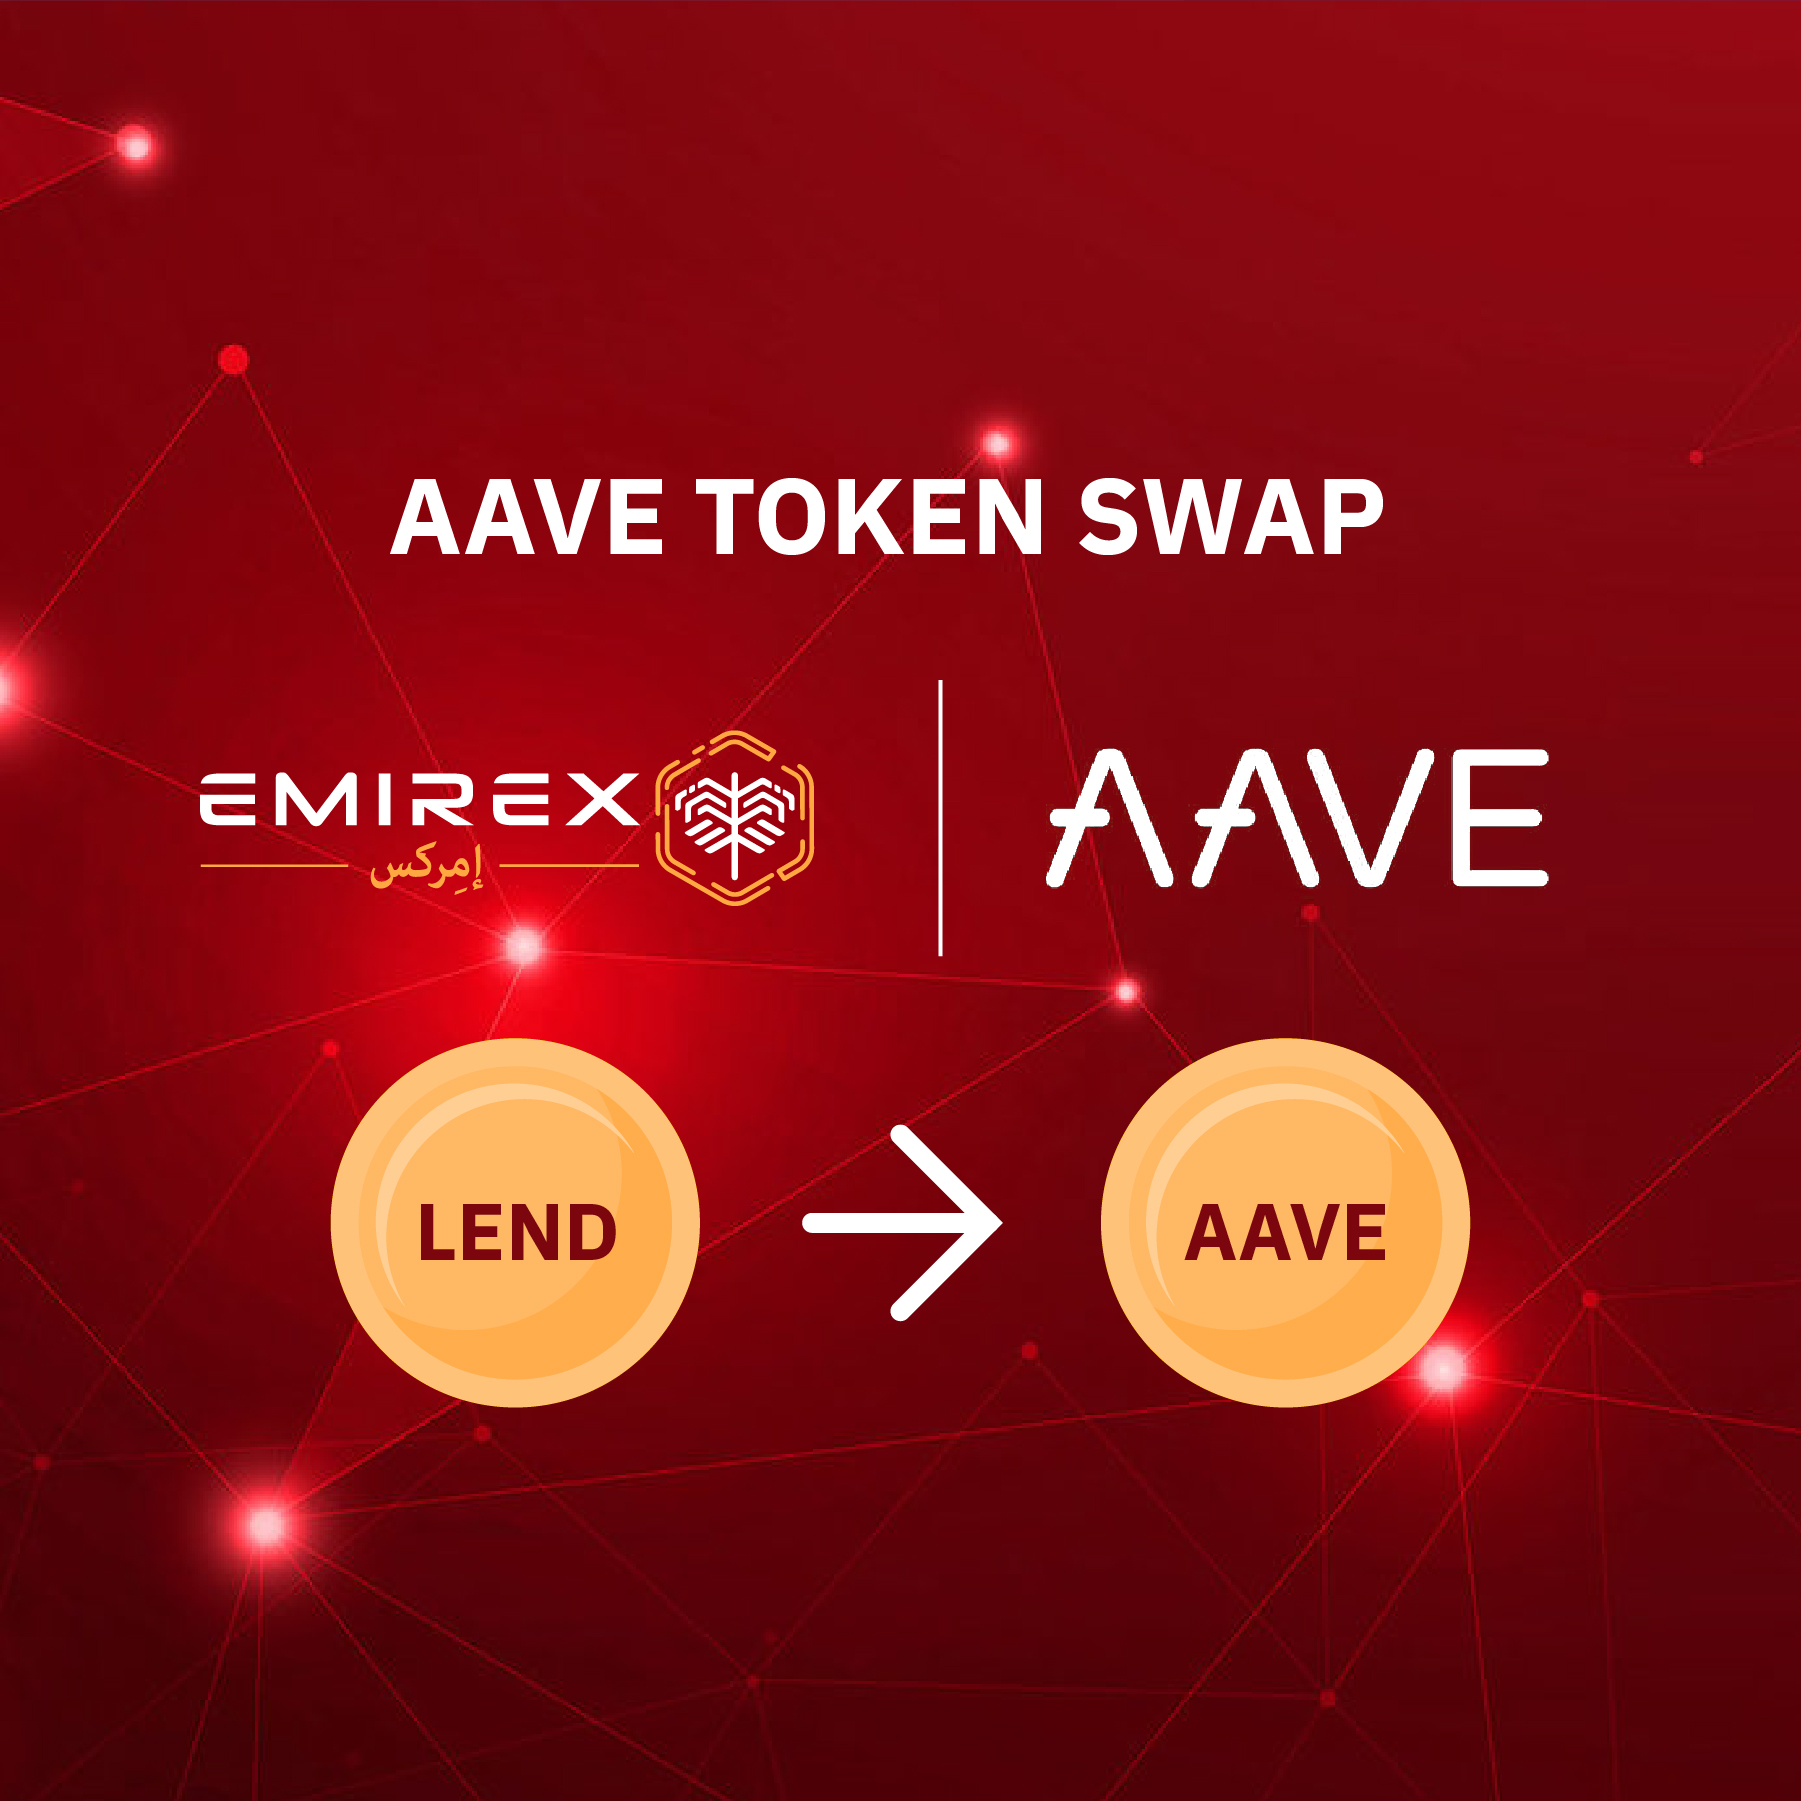 Emirex Will Support the Swap of Aave (LEND) Token to AAVE